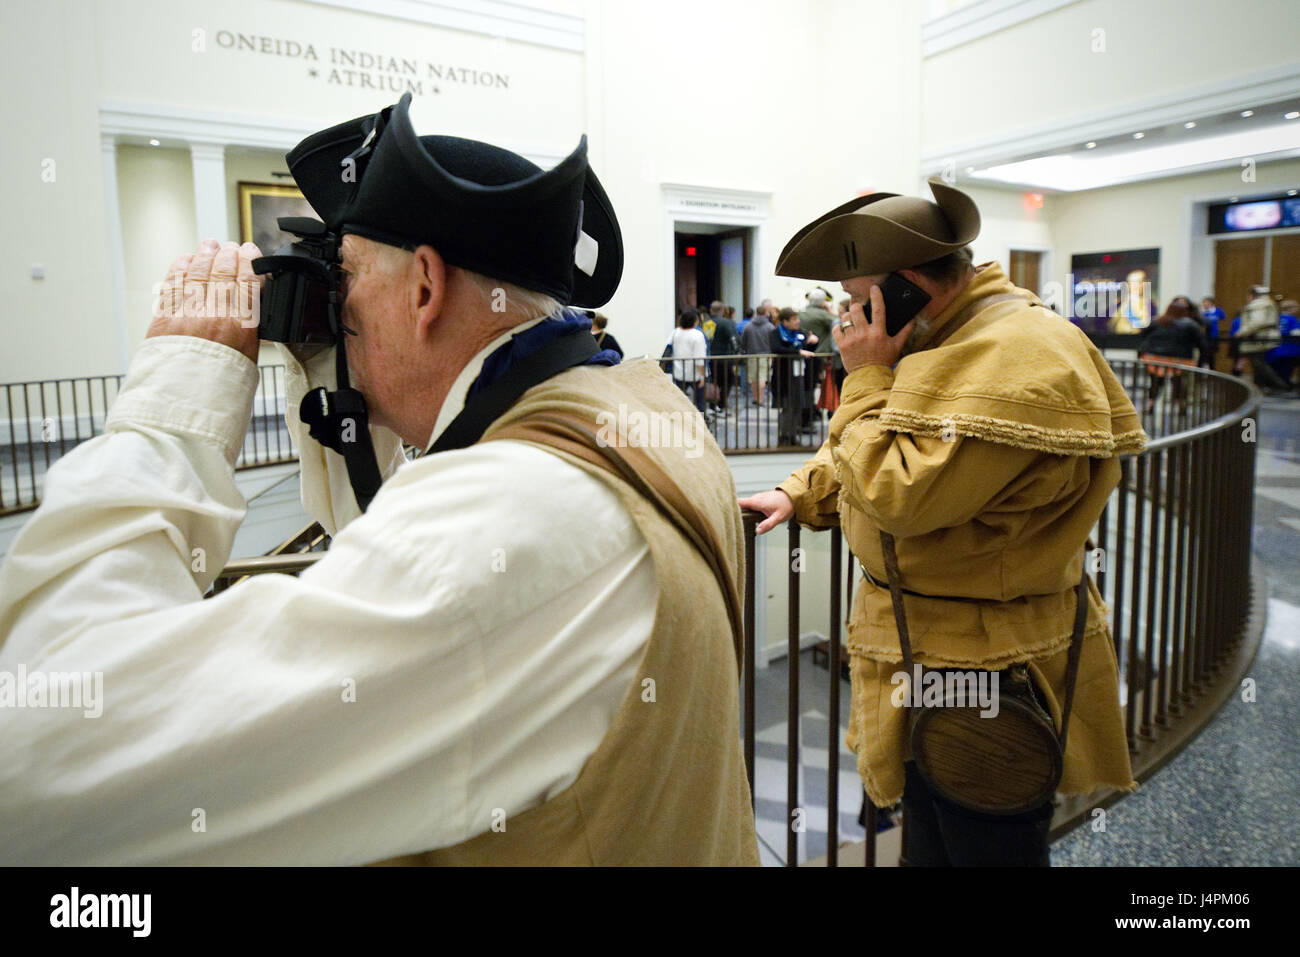 Visitors in Revolutionary War attire admire the exhibit during a visit of the Museum of the American Revolution, in Philadelphia, PA. Stock Photo